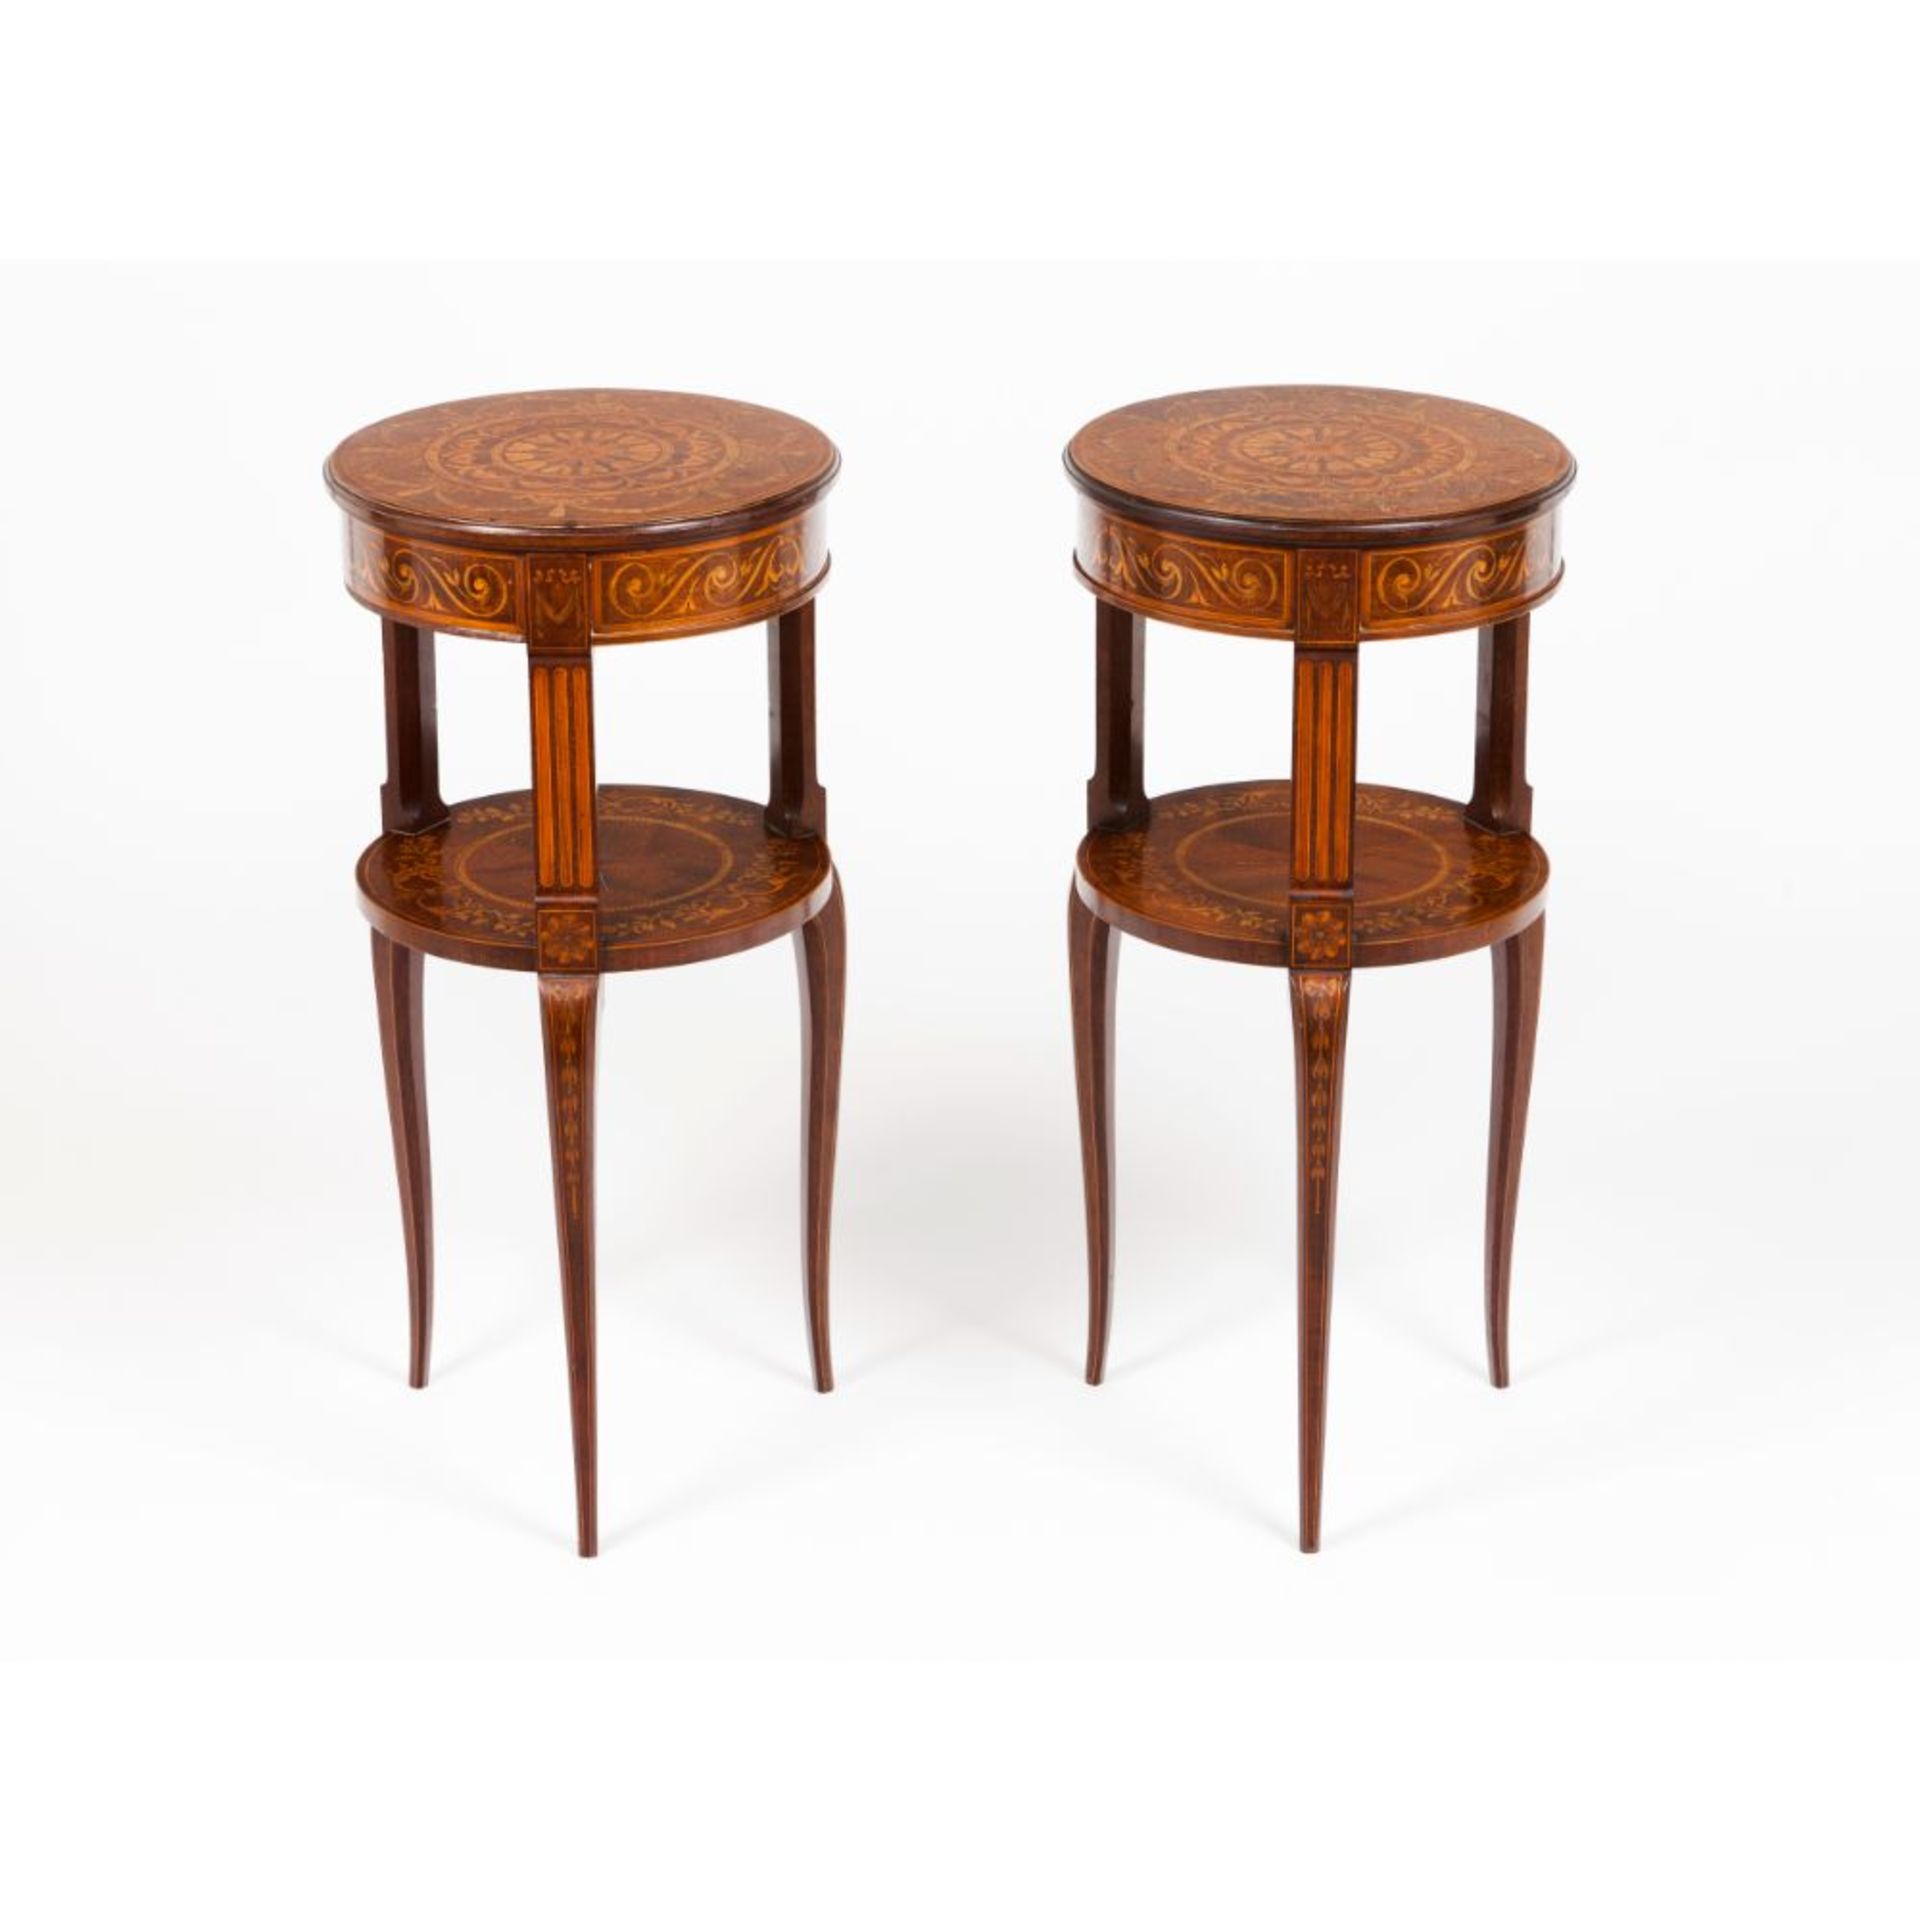 A pair of Louis XV / XVI side tables, Mahogany of profuse boxwood and other timbers marquetry